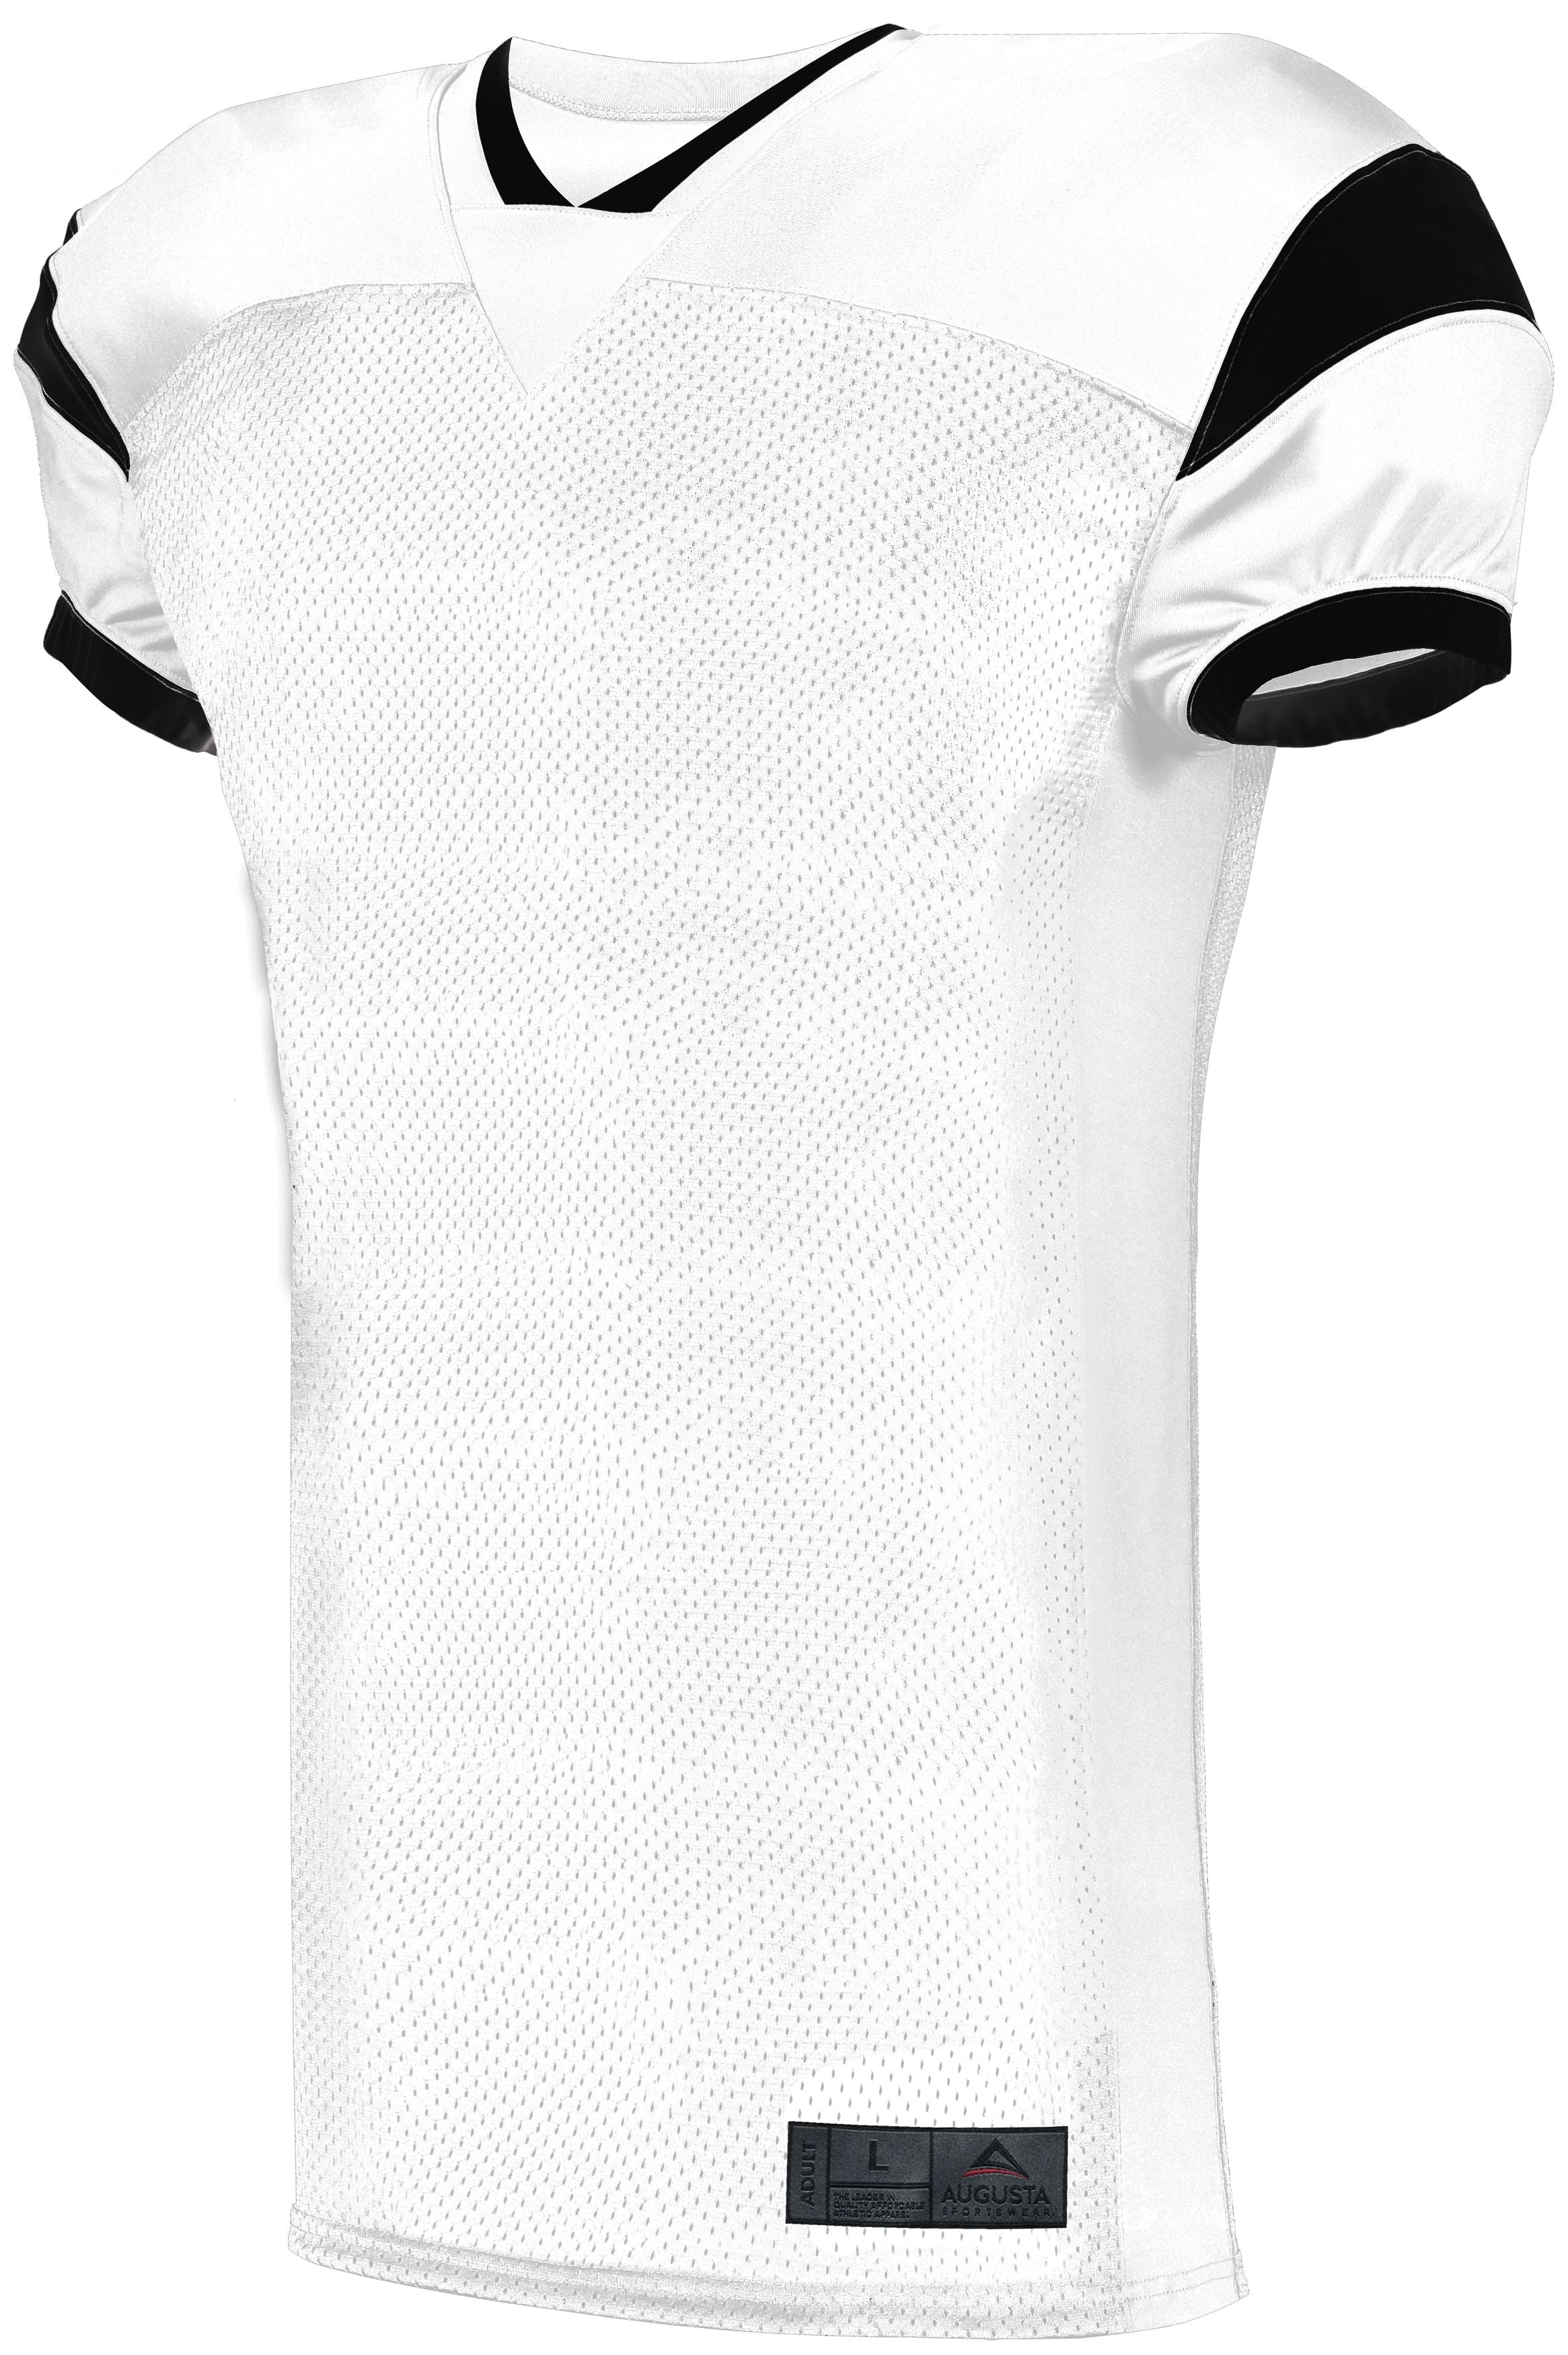 Augusta Sportswear Youth Slant Football Jersey in White/Black  -Part of the Youth, Youth-Jersey, Augusta-Products, Football, Shirts, All-Sports, All-Sports-1 product lines at KanaleyCreations.com